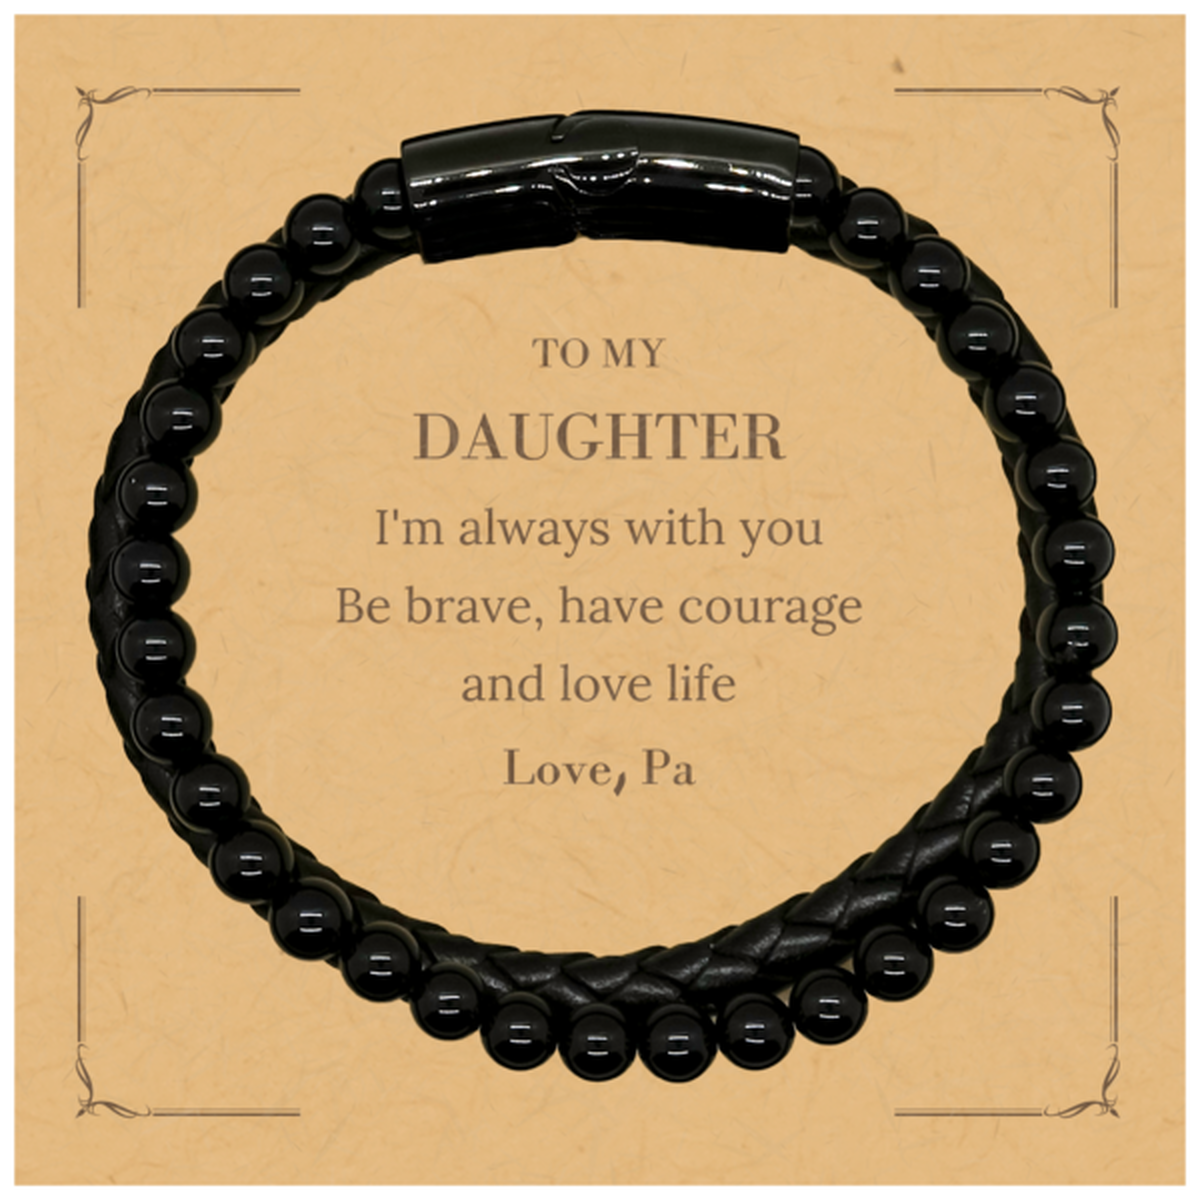 To My Daughter Gifts from Pa, Unique Stone Leather Bracelets Inspirational Christmas Birthday Graduation Gifts for Daughter I'm always with you. Be brave, have courage and love life. Love, Pa